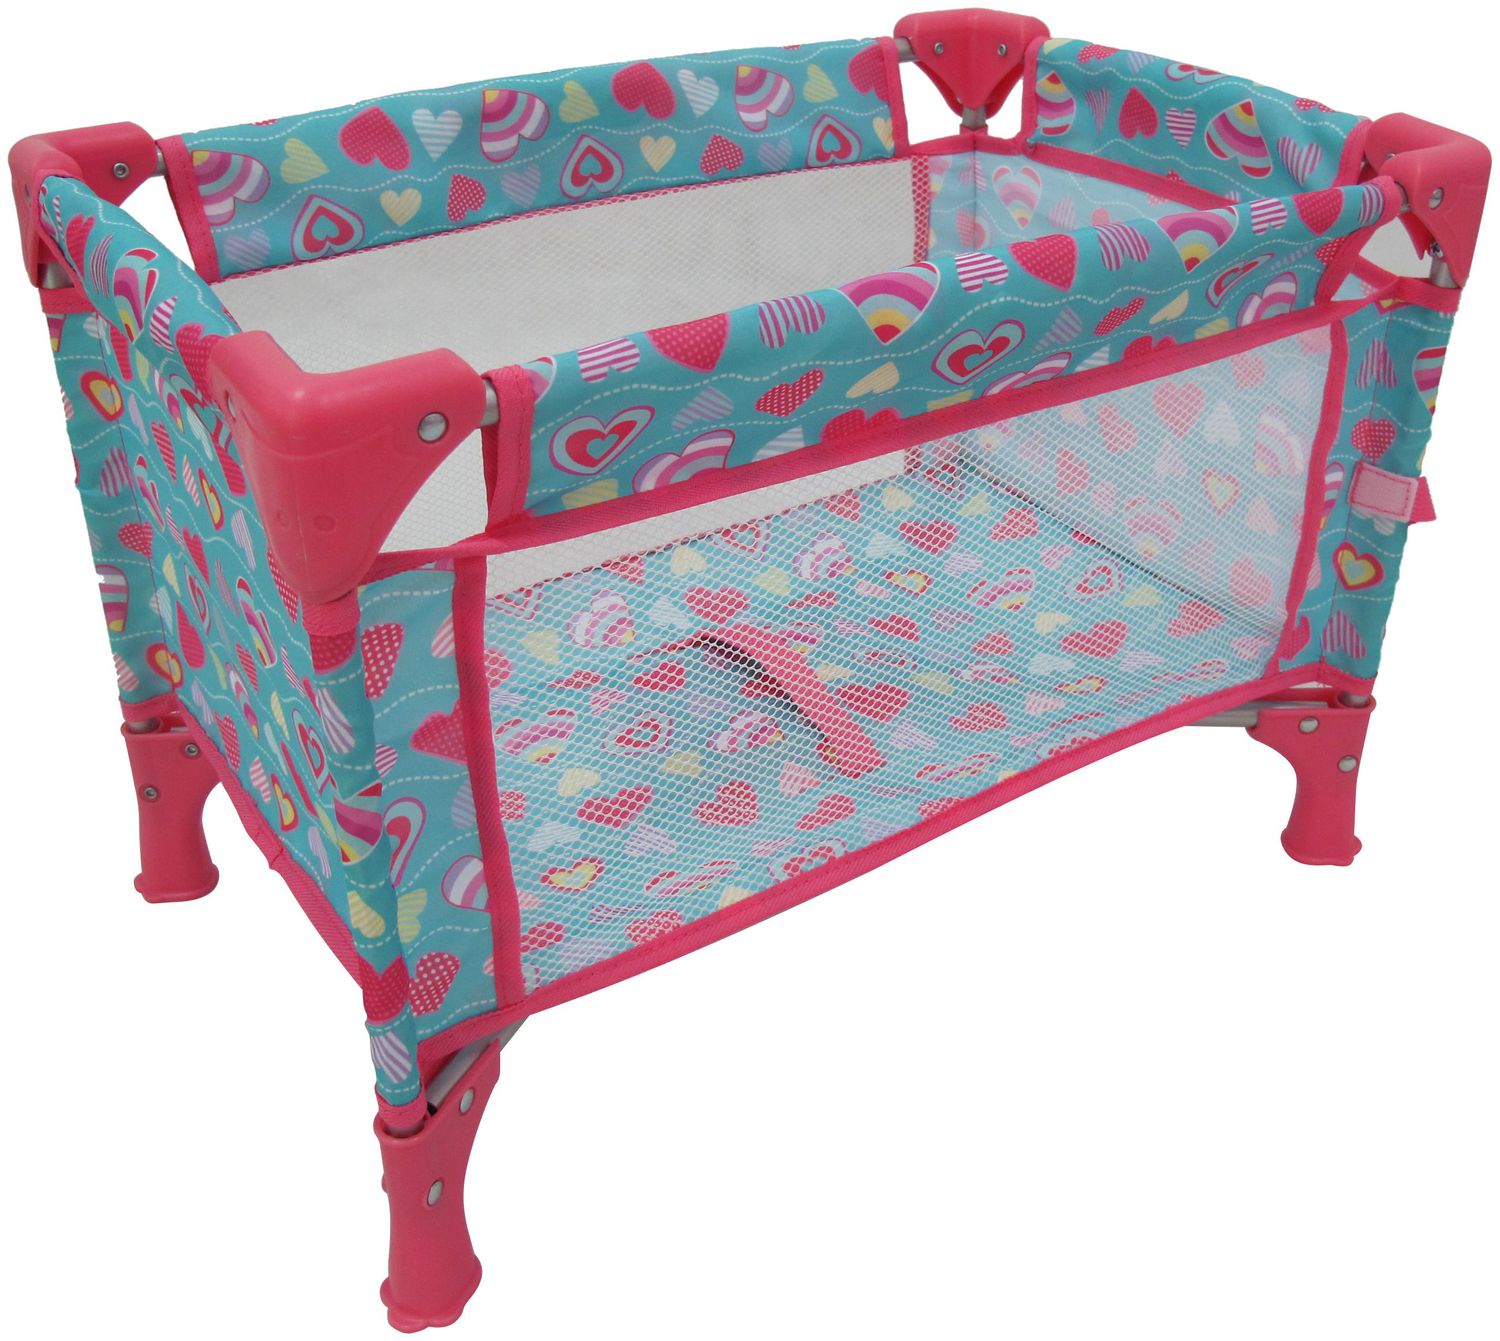 baby doll bed walmart